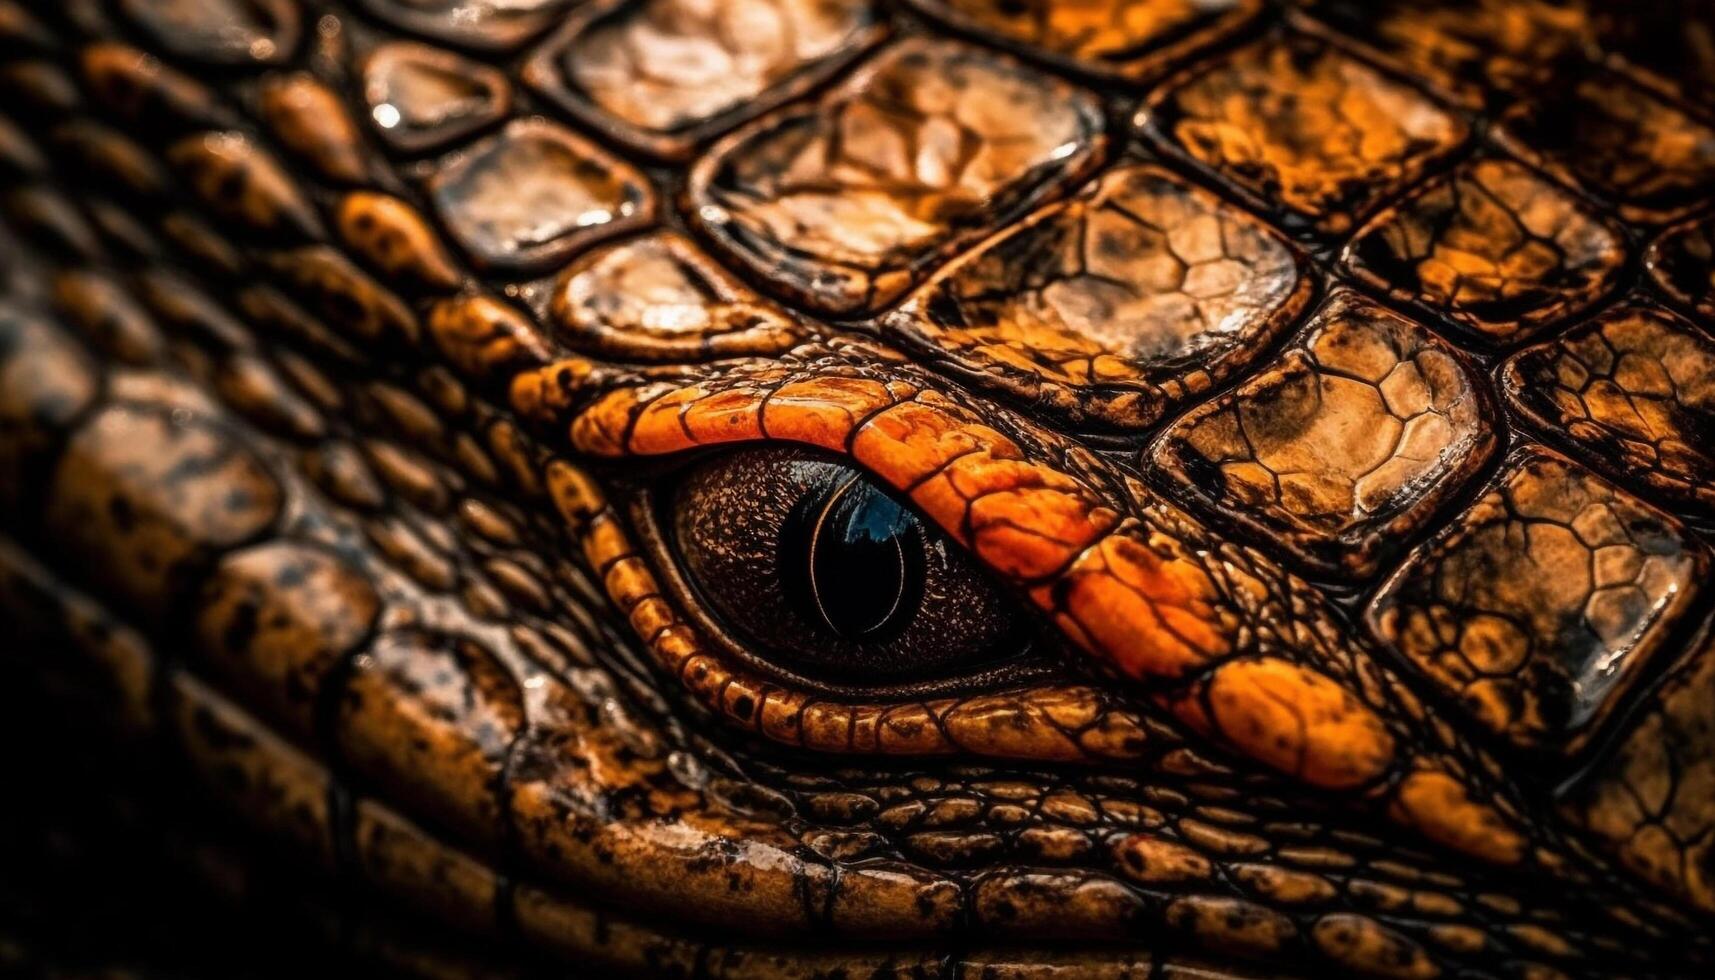 Animal skin pattern in close up multi colored reptile scales generated by AI photo